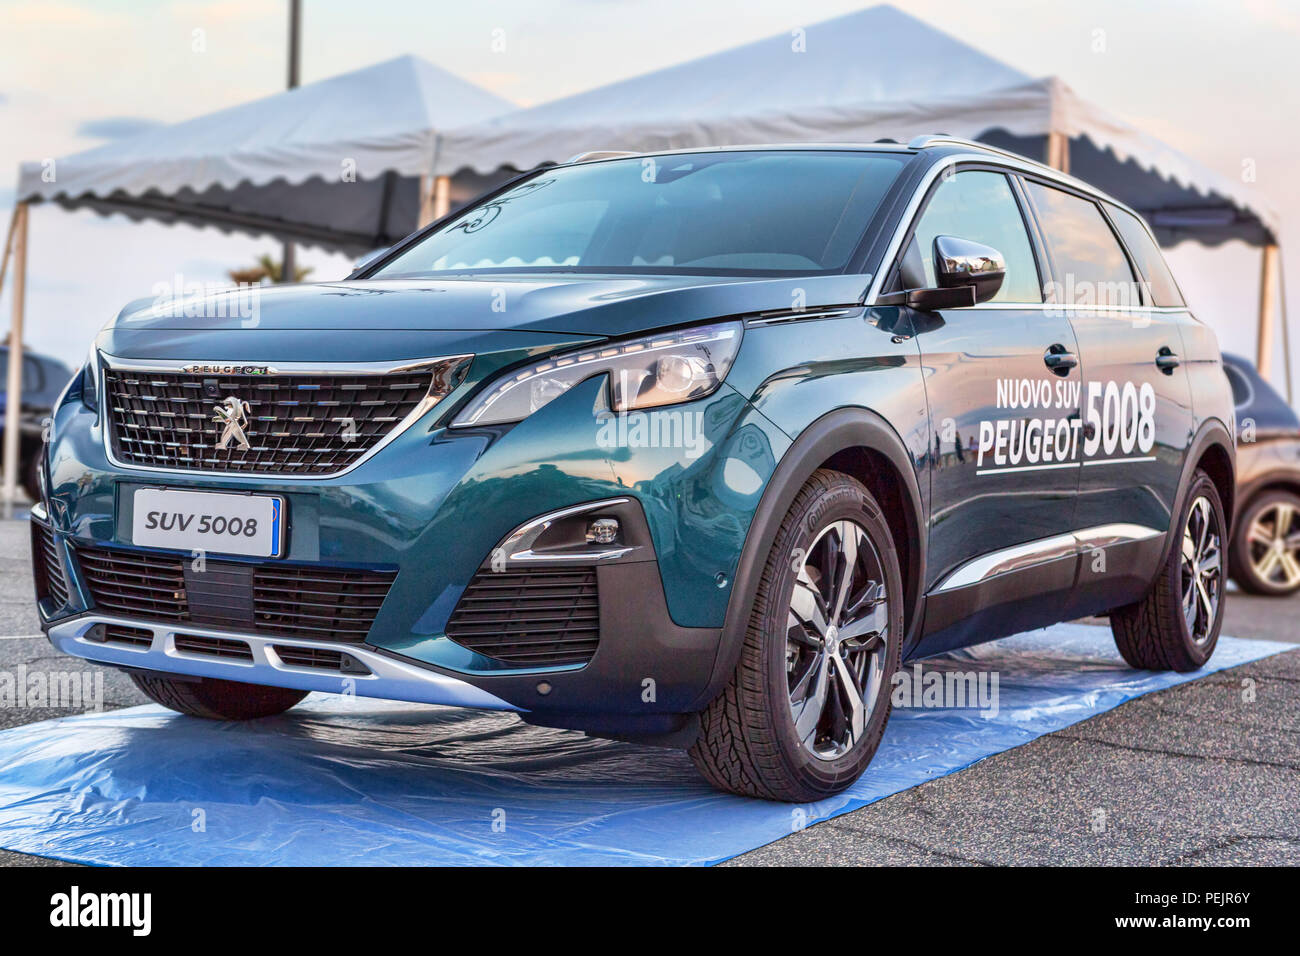 Rome,Italy - July 21, 2018:On occasion of  Rome s Rally event, the motor showrooms exhibit new cars models in Rome: A new SUV 5008 from Peugeot Stock Photo